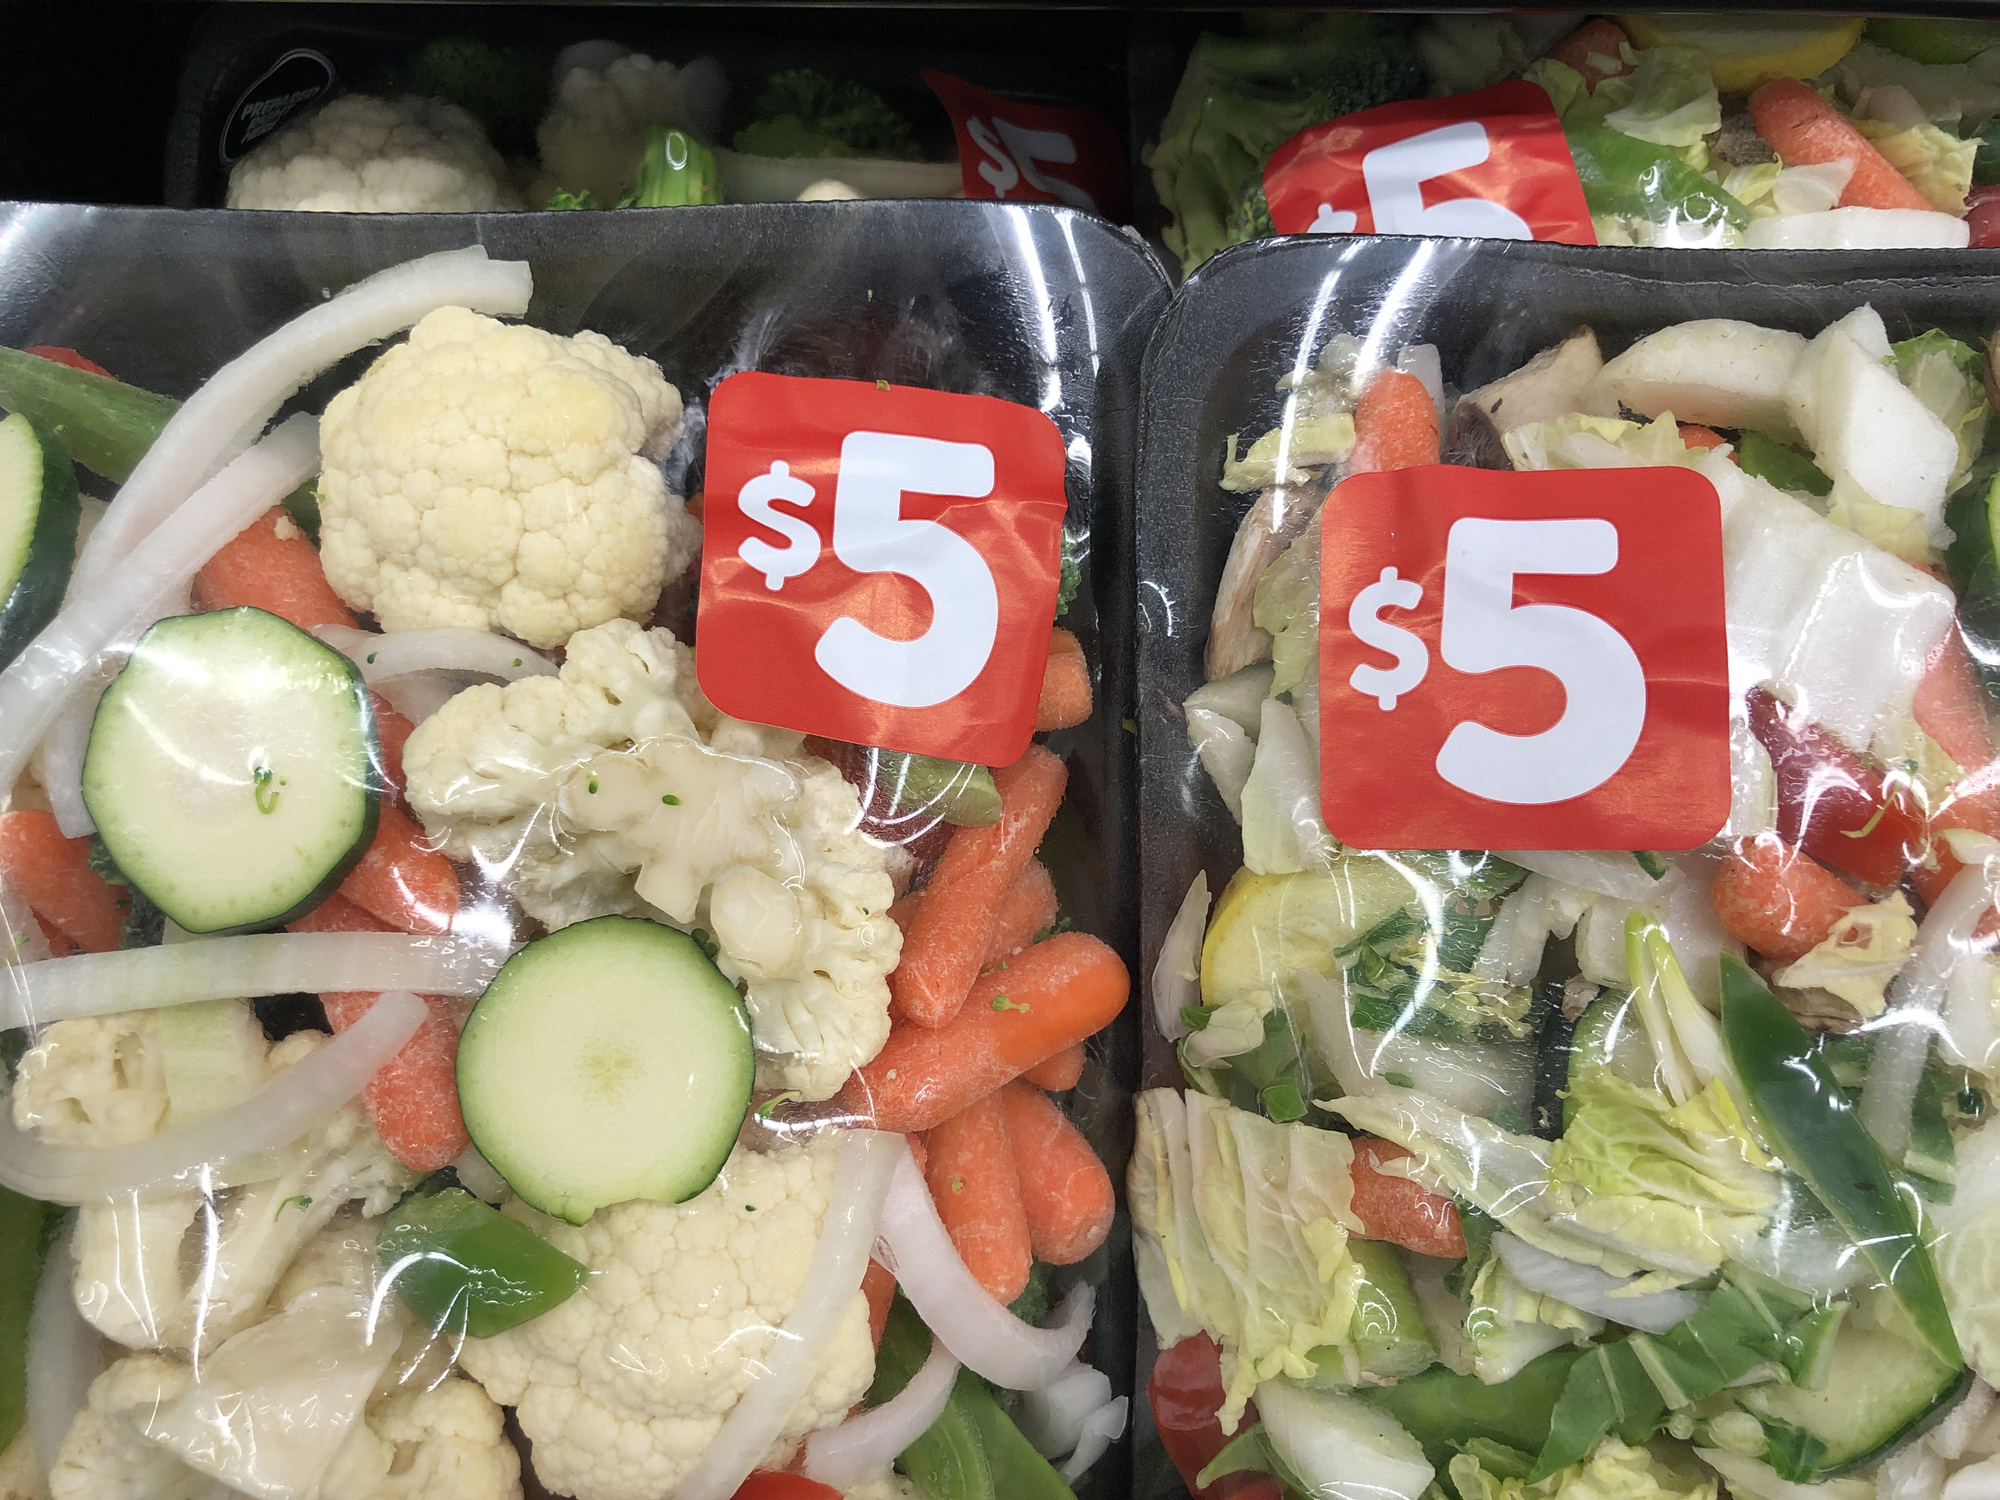 Pre-packaged vegetables for stir-fry, priced at $5 each, displayed in a grocery store